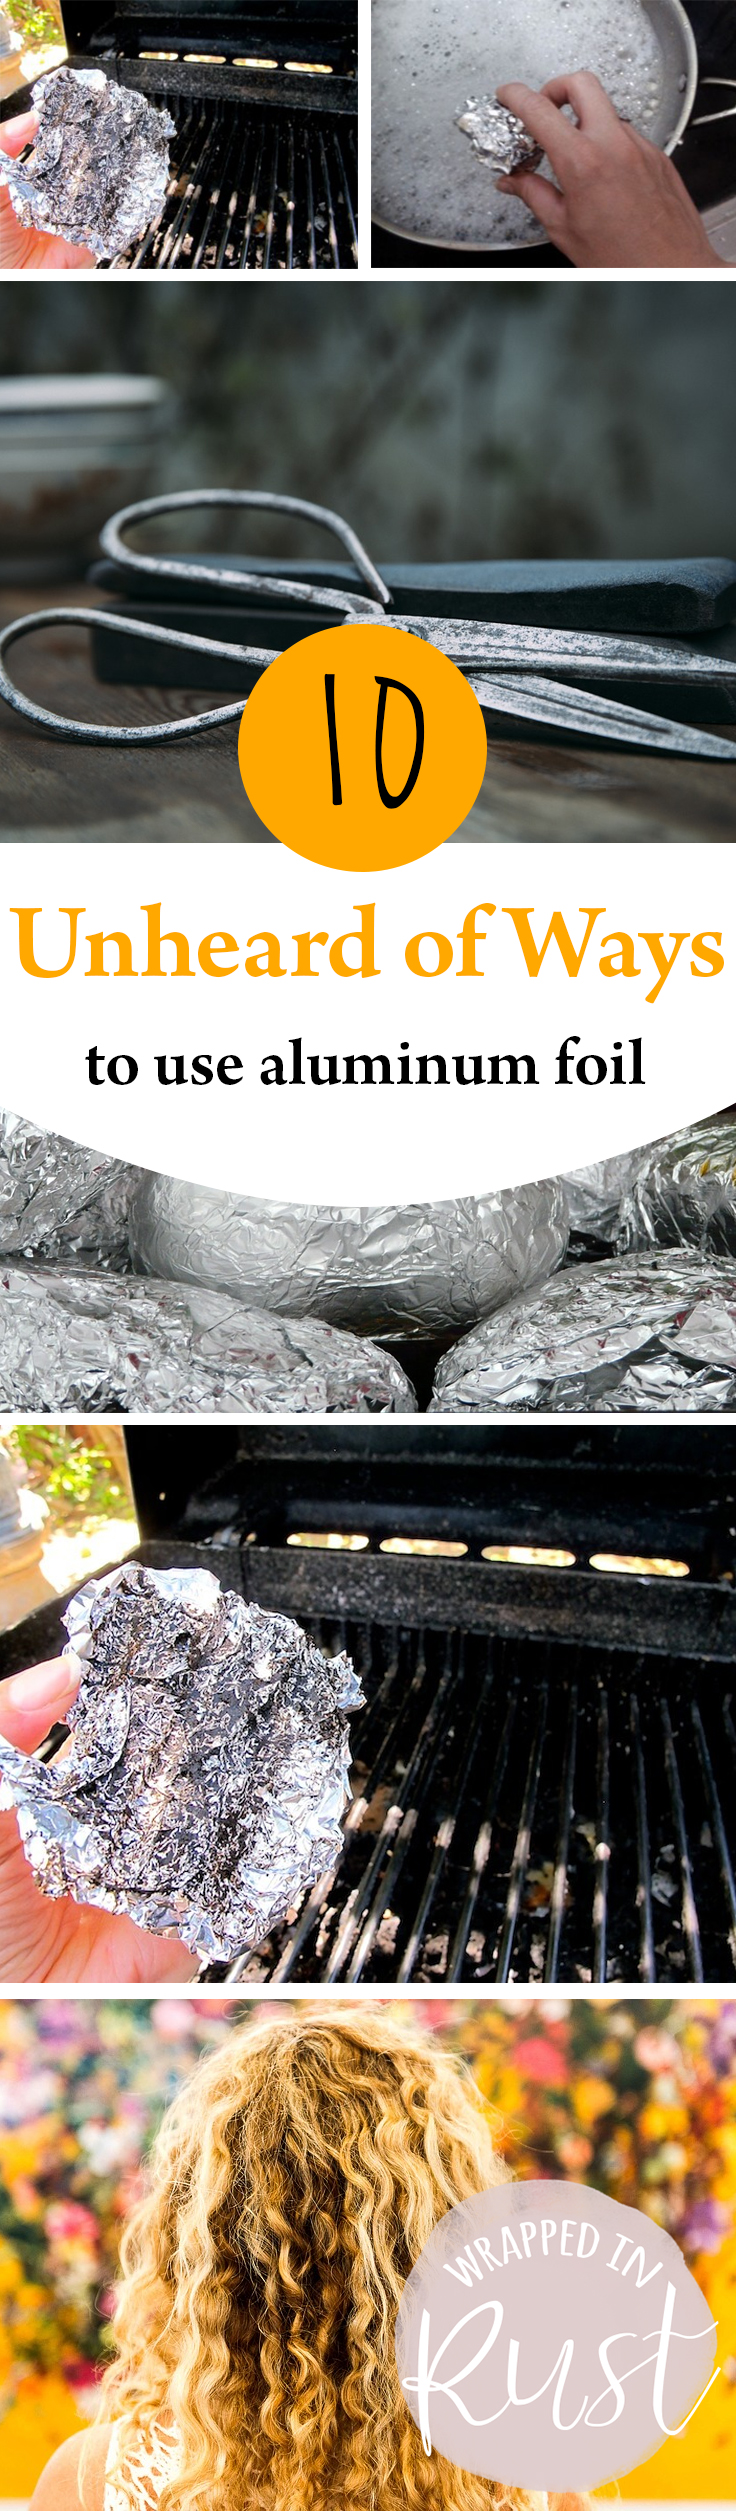 How to Use Aluminum Foil, Uses for Aluminum Foil, Things to Do With Aluminum Foil, Cleaning Tips and Tricks, Aluminum Foil, Life Hacks, Cleaning Hacks, Easy Cleaning Tips and Tricks, Popular Pin. 